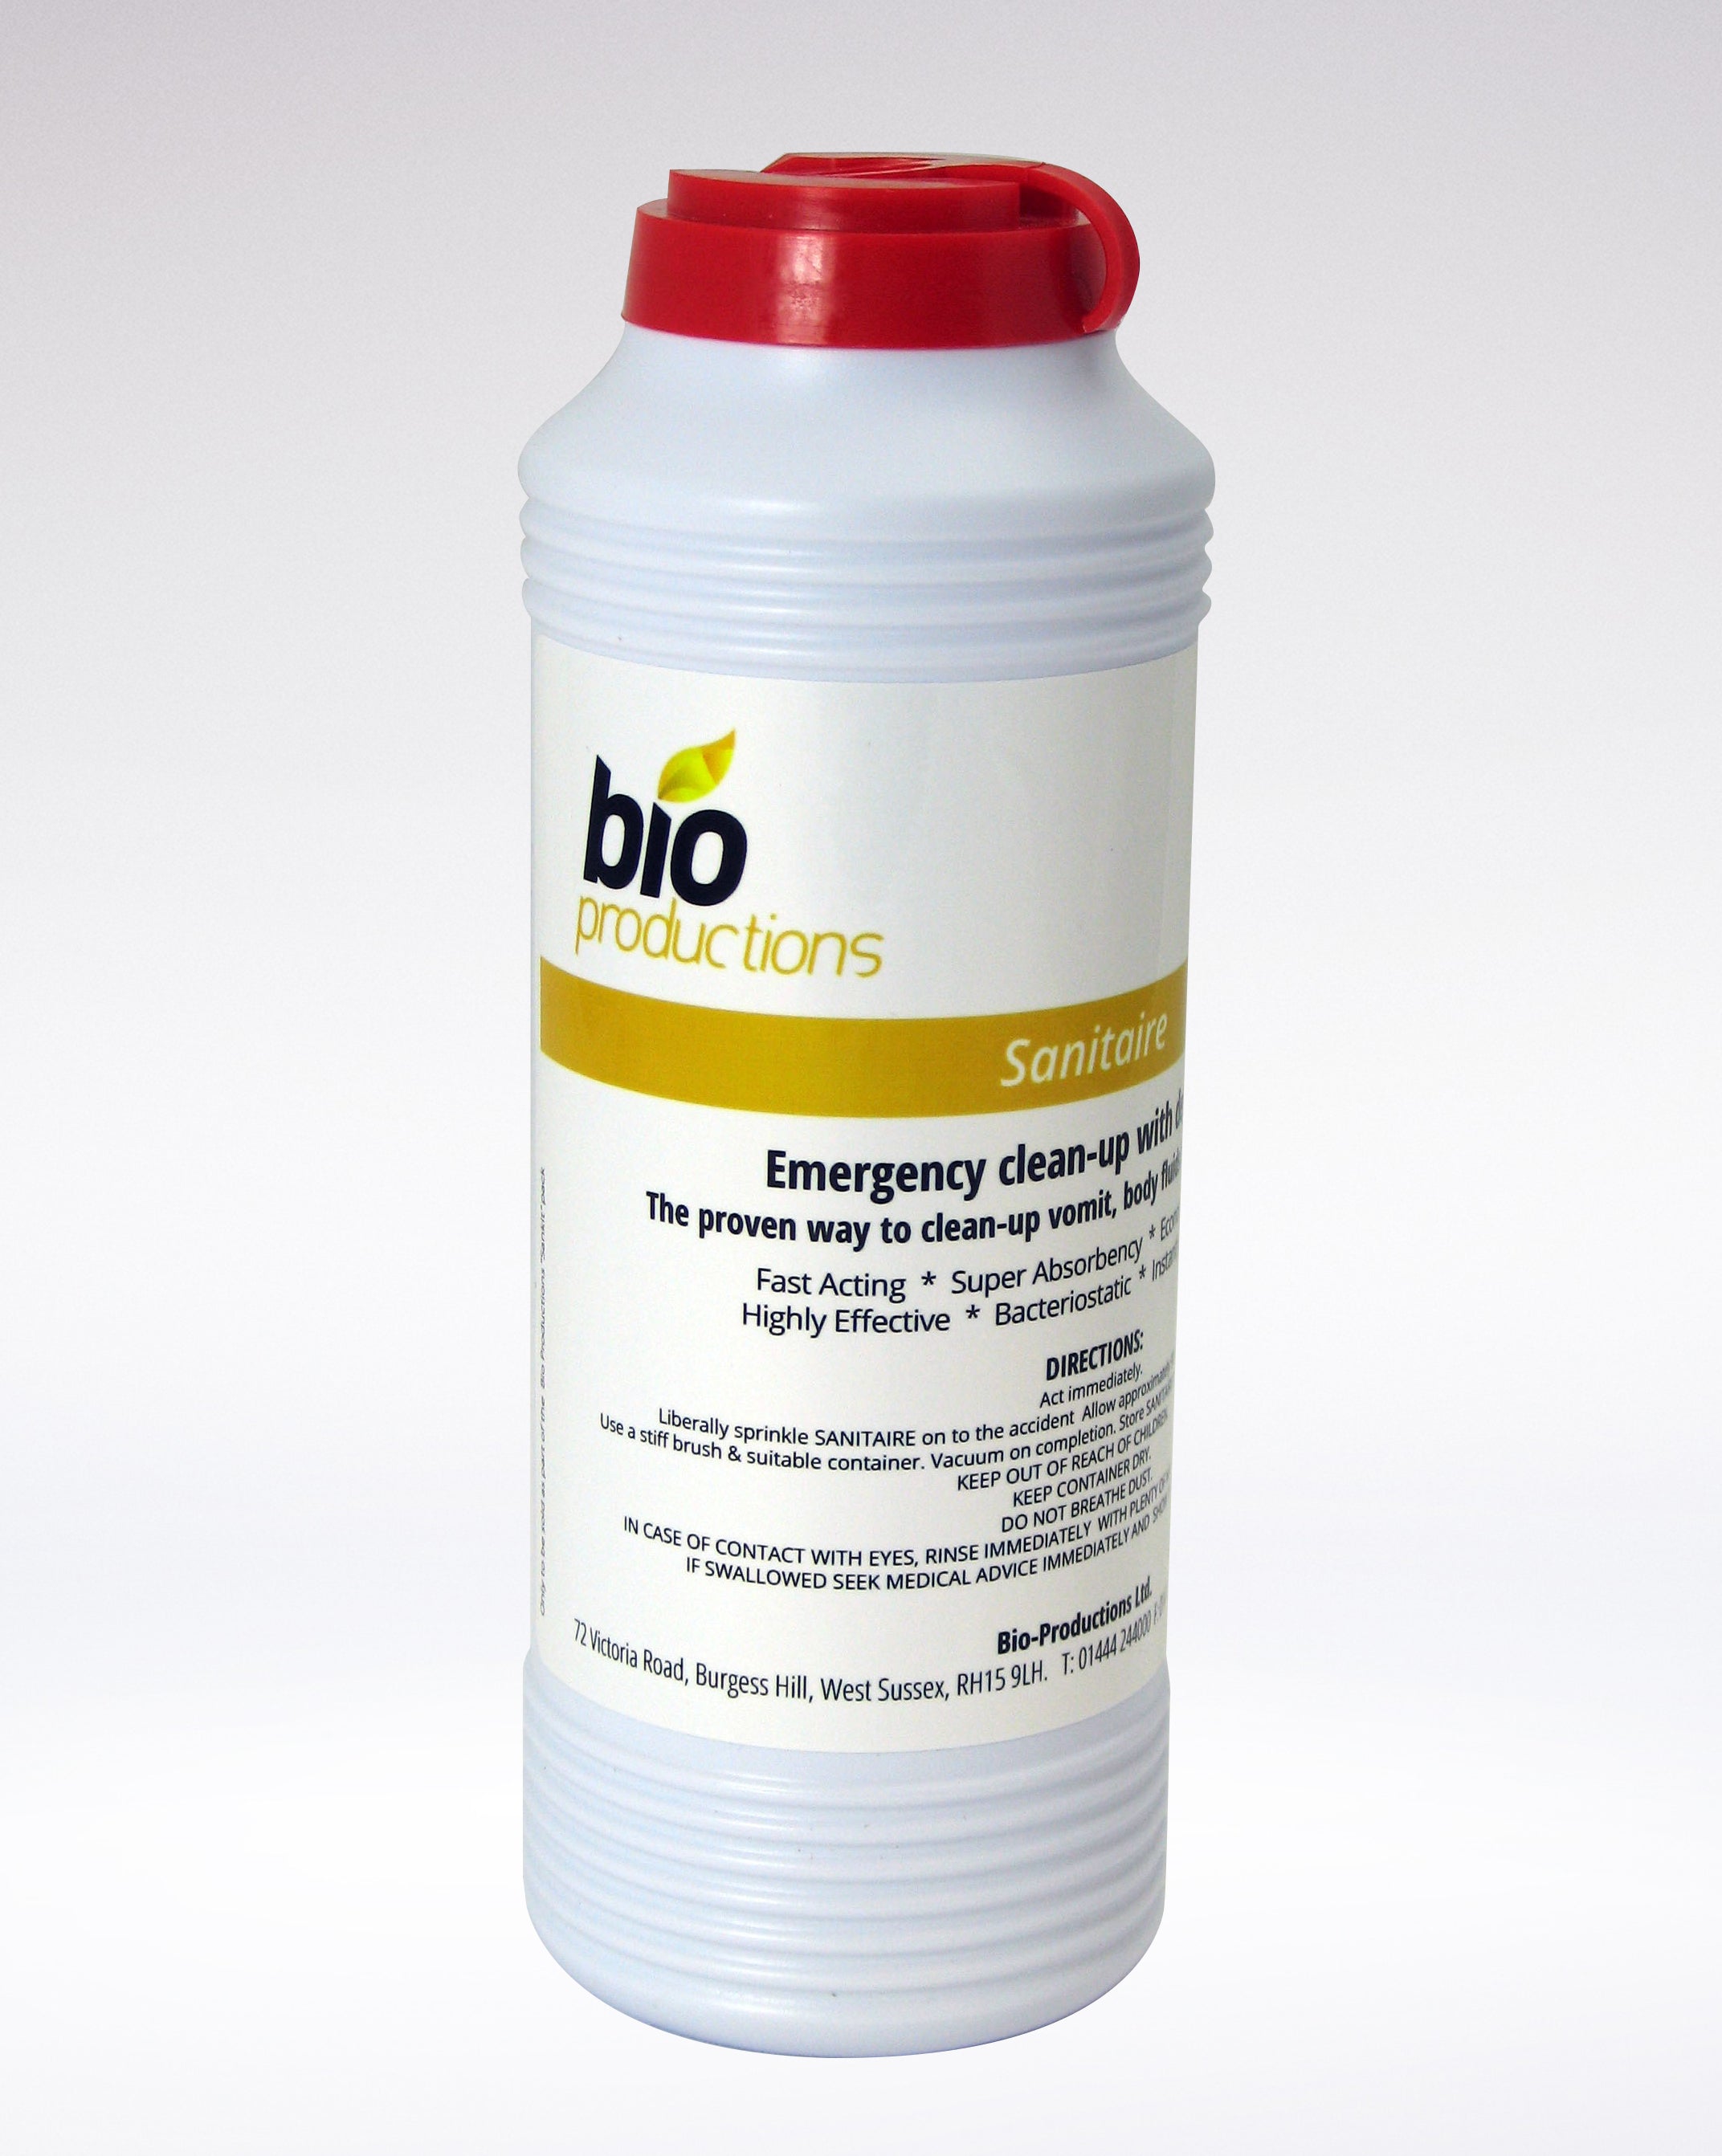 Bio Productions Sanitaire Emergency Absorbent Clean-up Powder SAN240 240 g Shaker - for Vomit / Sick, Blood & Faeces